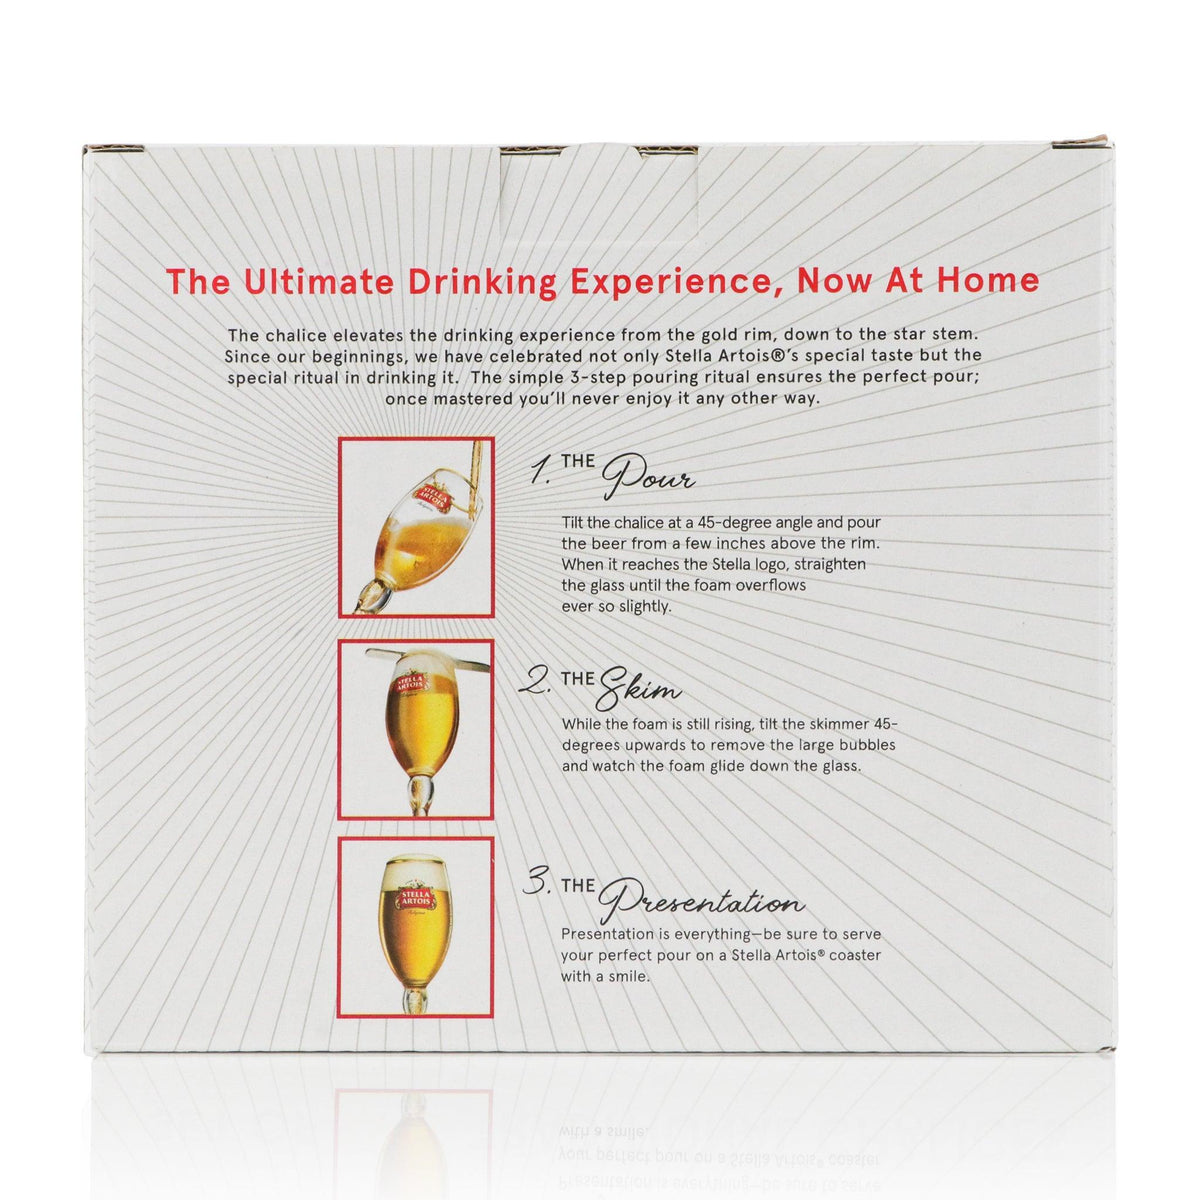 https://www.beergearusa.shop/wp-content/uploads/1692/91/we-offer-the-possibilities-of-stella-artois-chalice-2-pack-set-stella-artois-with-reasonable-price_3.jpg